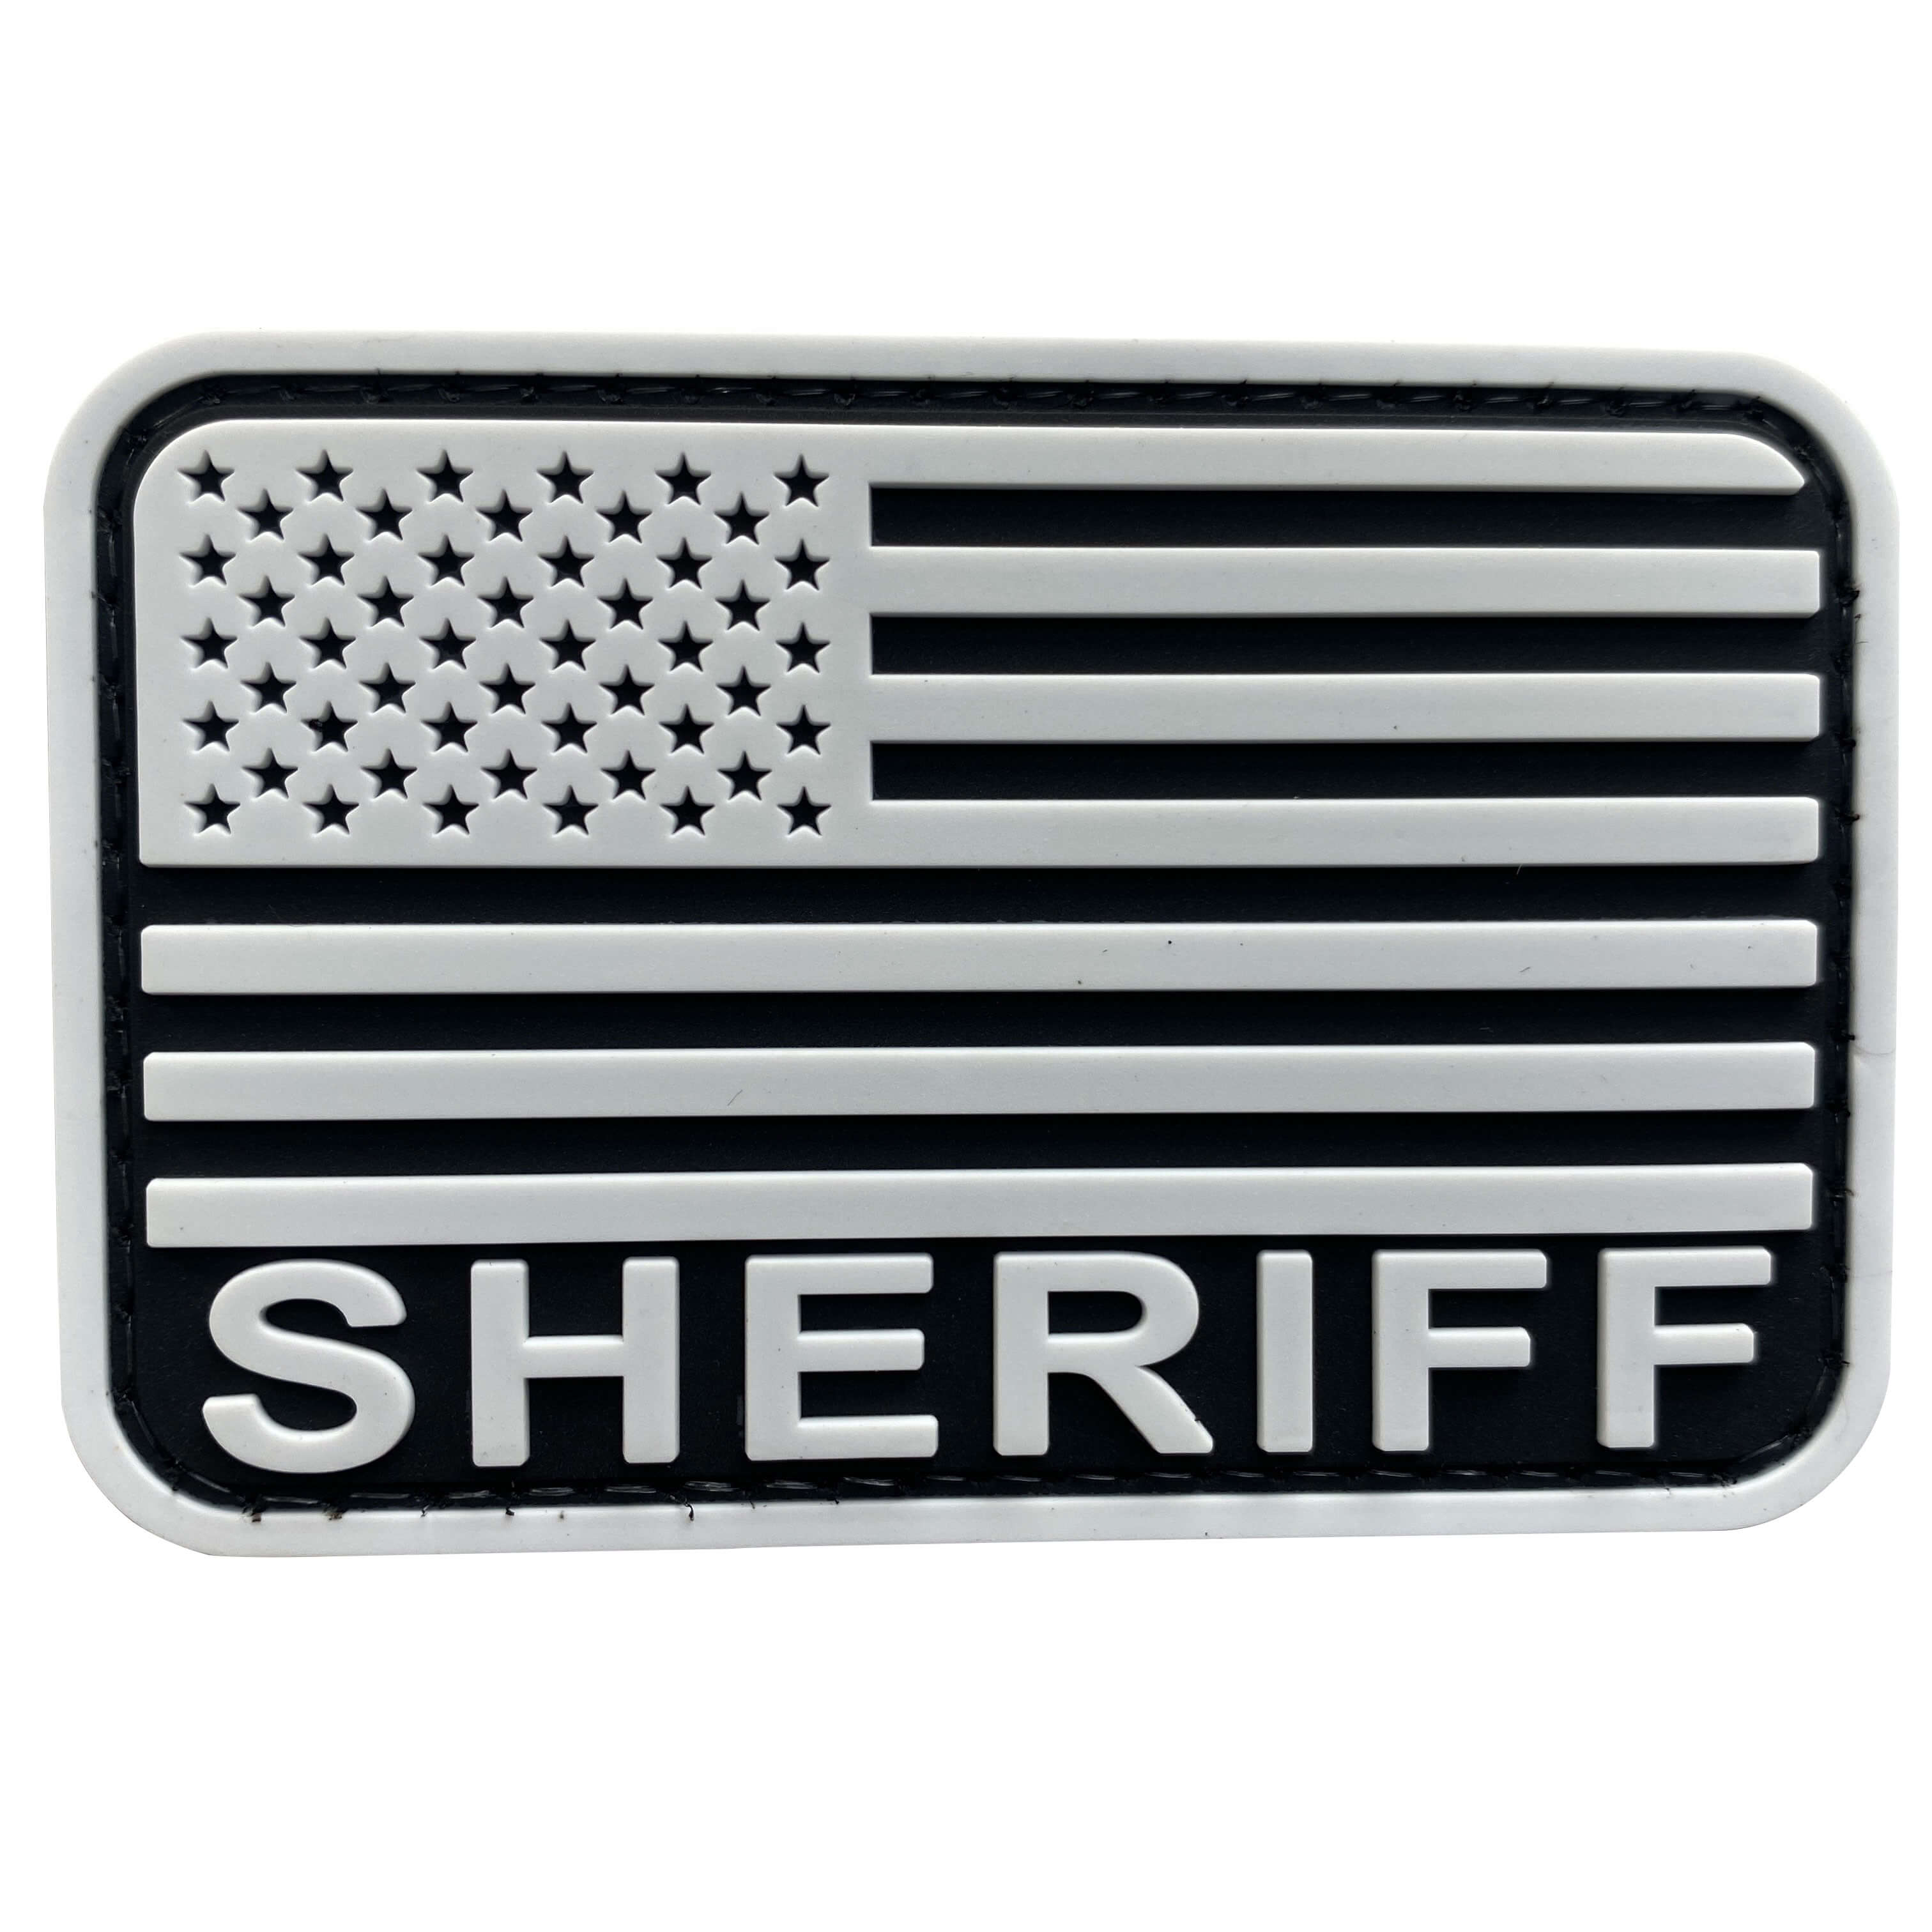 SHERIFF Uniform ID Patches 6x2 - White Lettering - Twill Backing - 20% Off